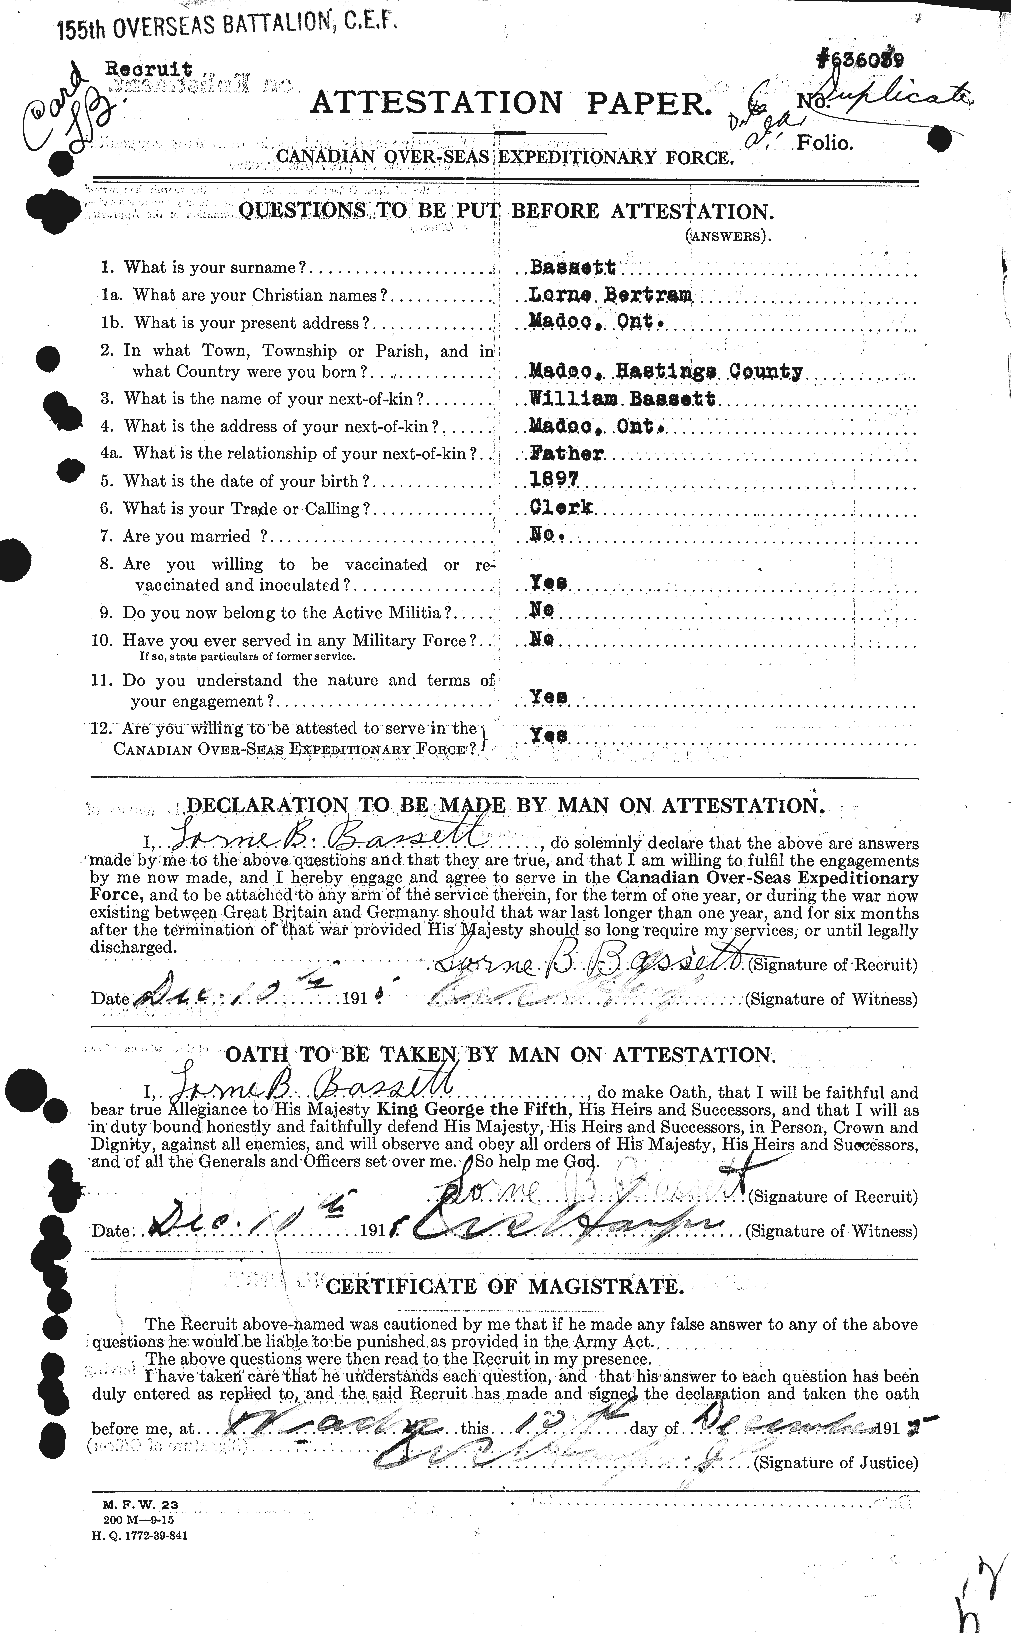 Personnel Records of the First World War - CEF 221047a